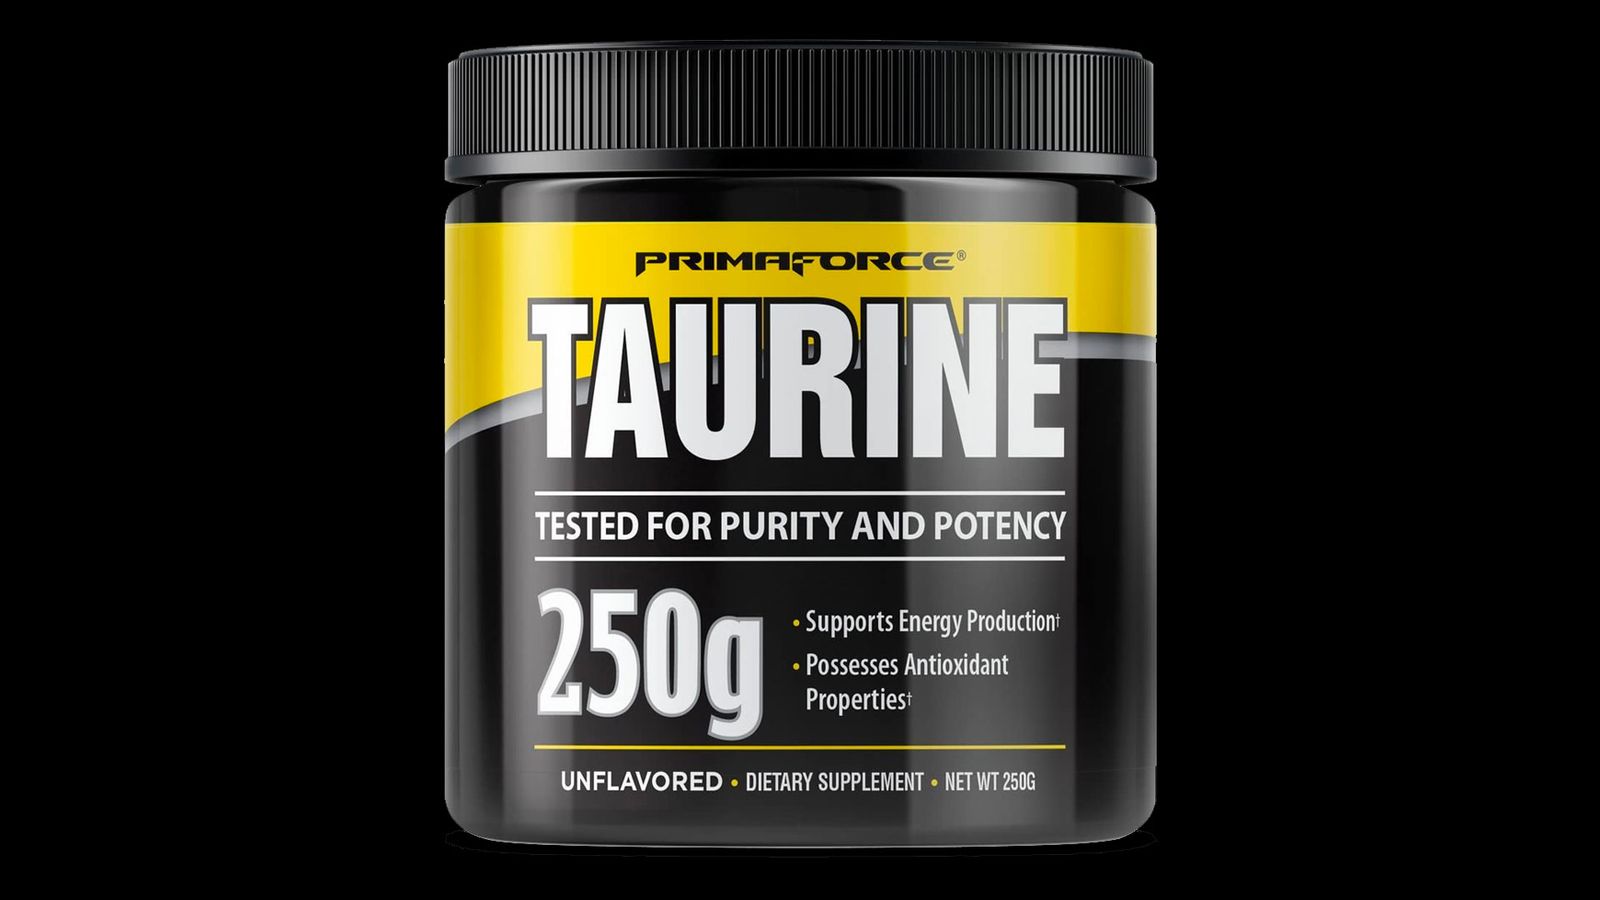 Primaforce Unflavoured Taurine product image of a black container with yellow and grey branding.